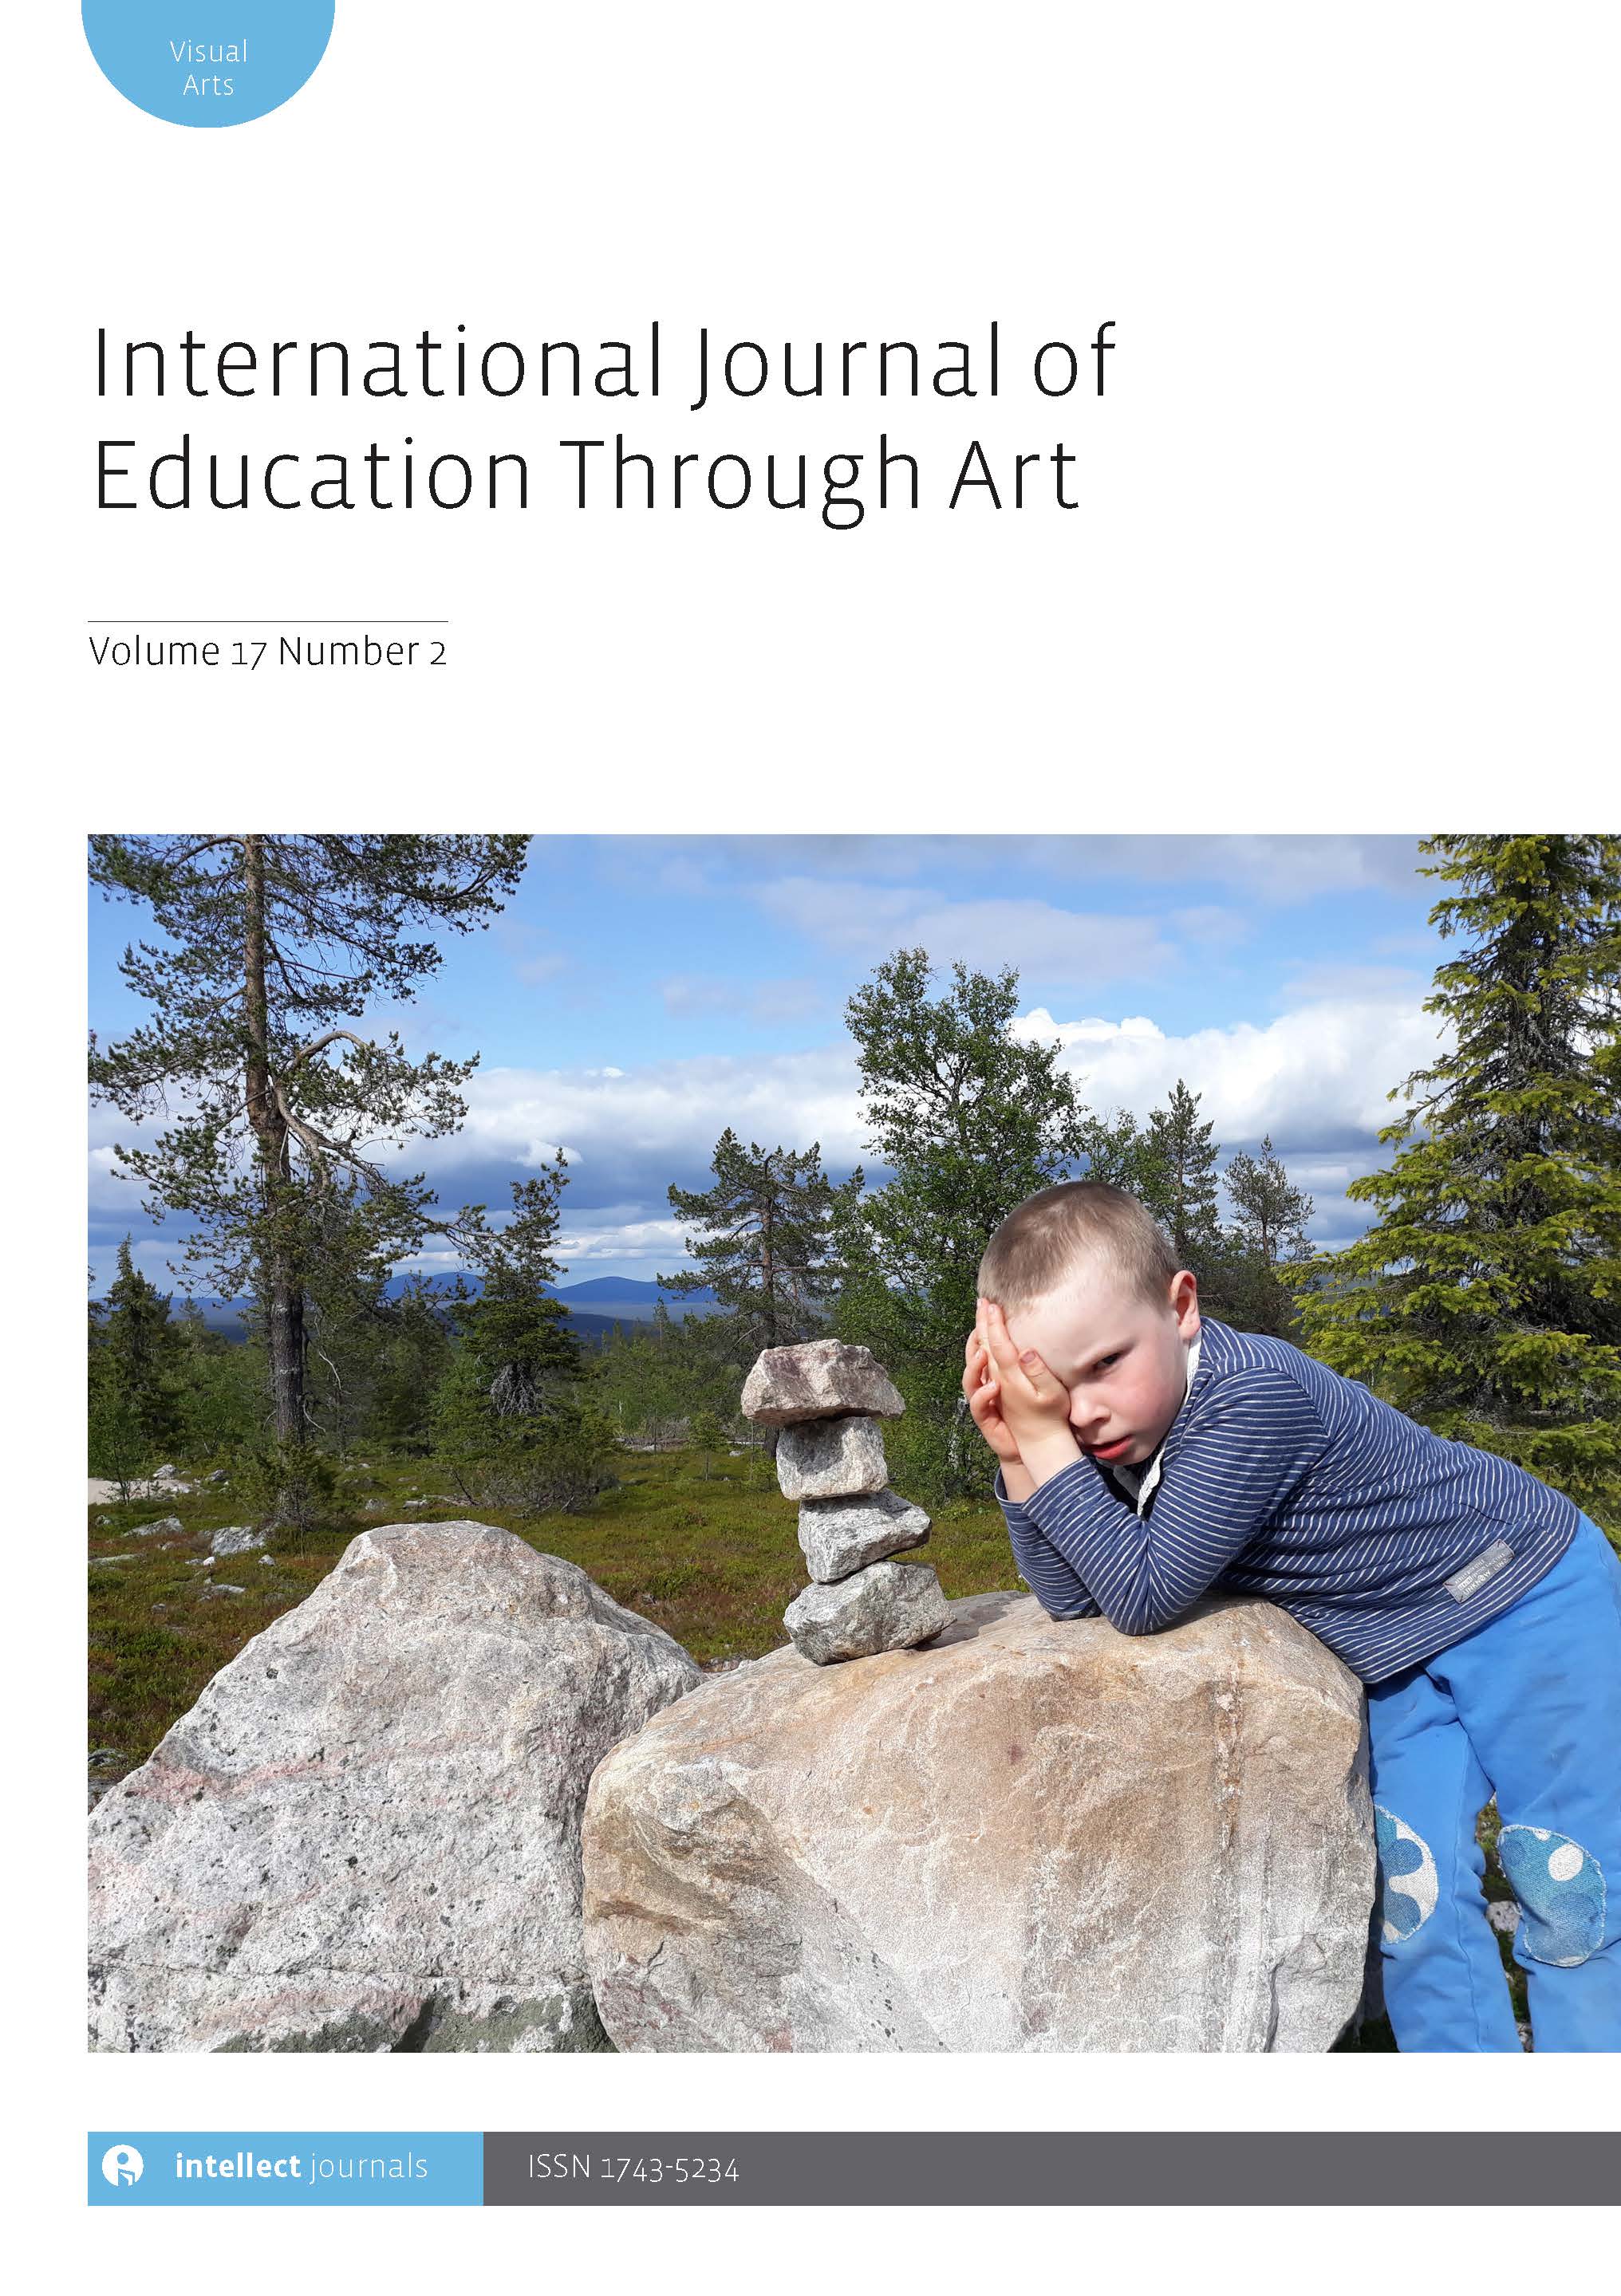 International Journal Of Education Through Art 17.2 is out now!